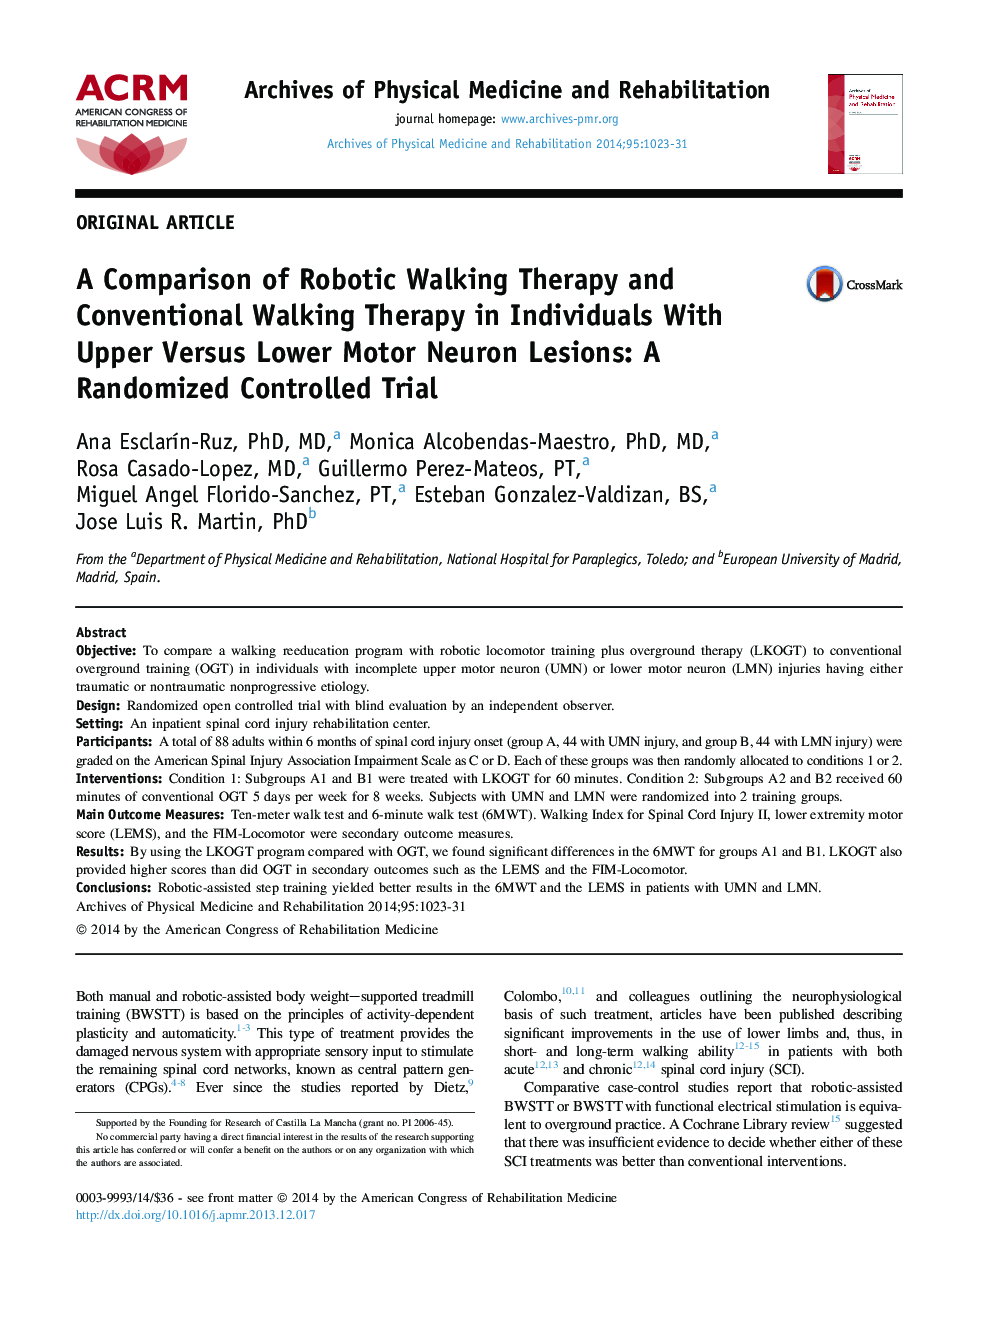 A Comparison of Robotic Walking Therapy and Conventional Walking Therapy in Individuals With Upper Versus Lower Motor Neuron Lesions: A Randomized Controlled Trial 